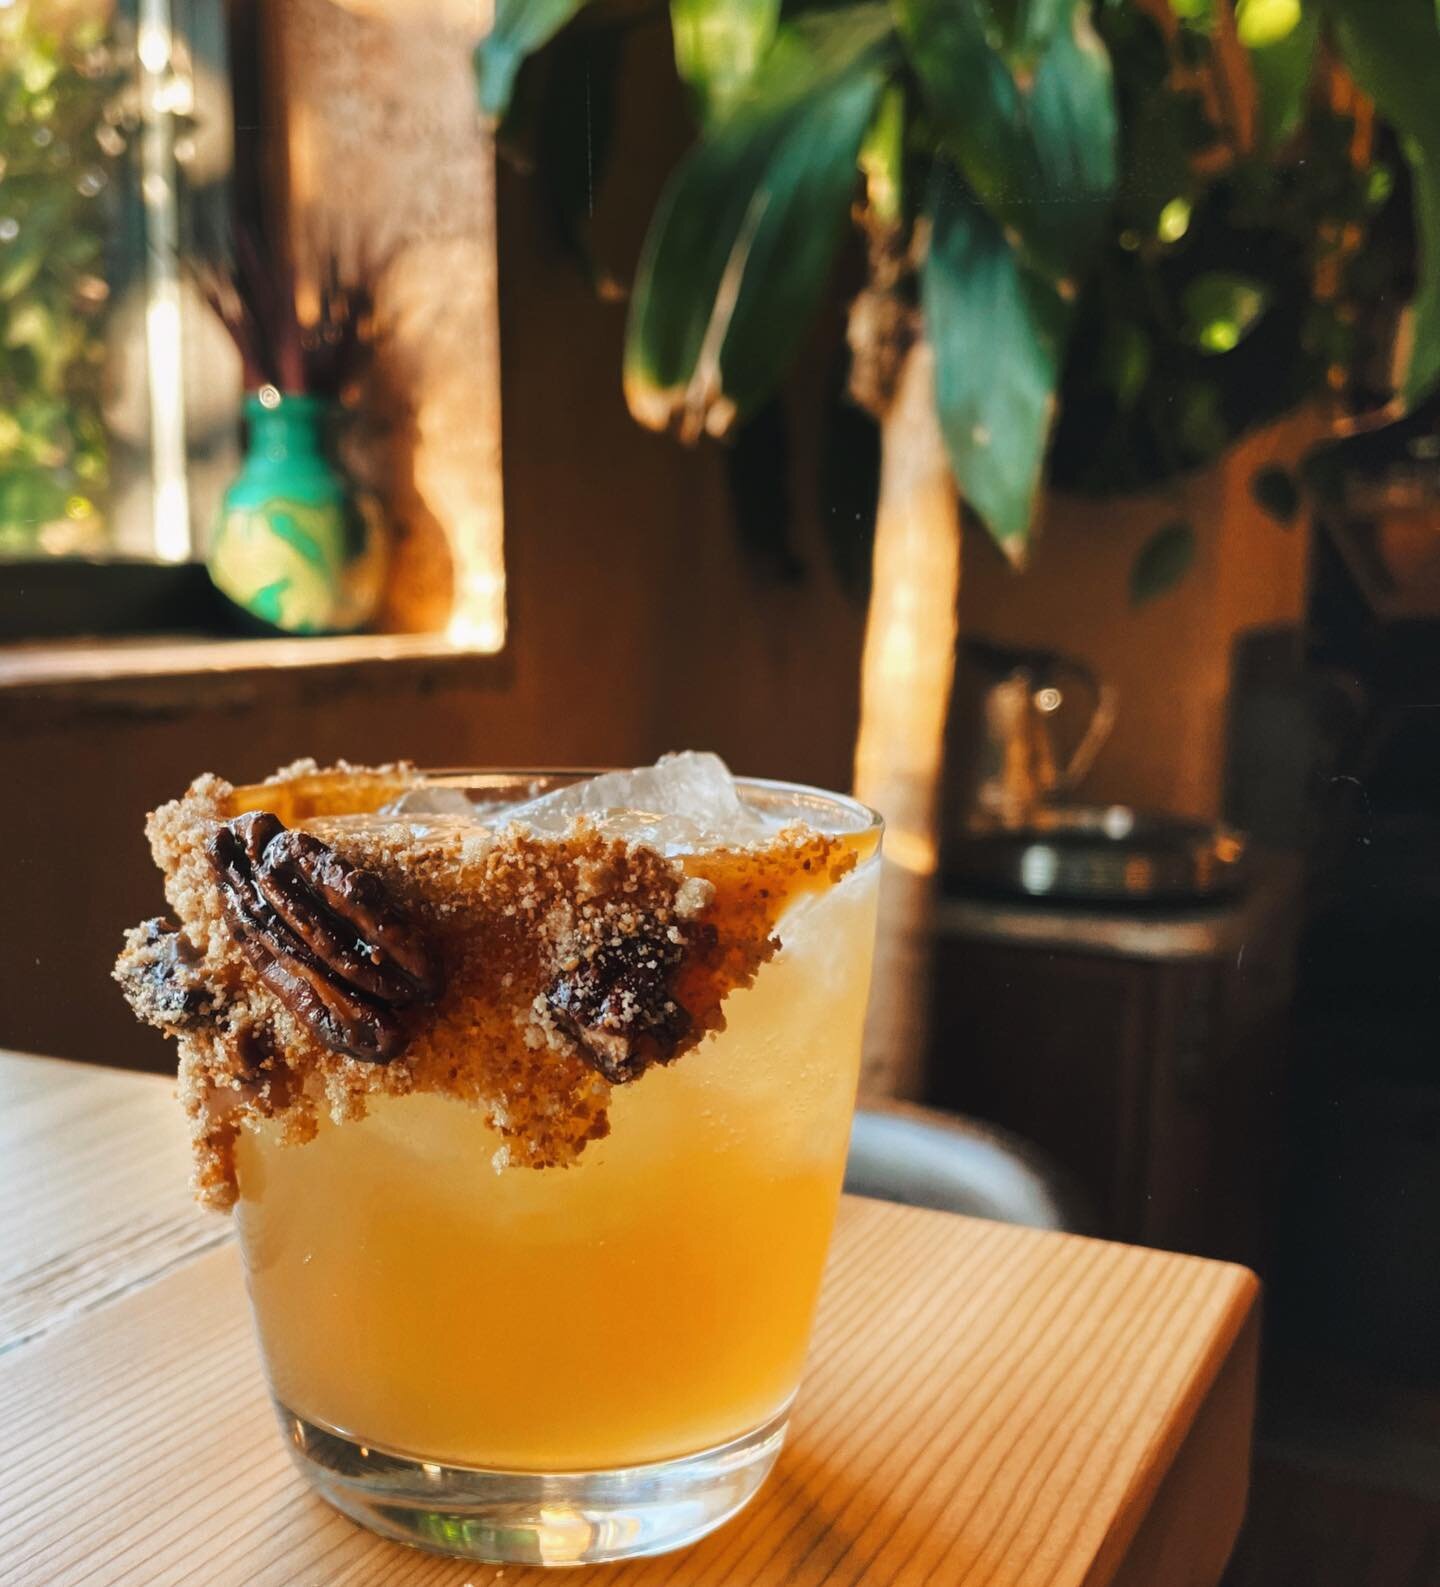 Pregame 🦃 with our Pecan Pie Marg &gt;&gt; @puebloviejo Tequila, Magdala, Lemon, Brown Butter Simple Syrup, Licor 43, and a Pecan Pie Rim (Caramel, Brown Sugar, Graham Cracker, Candied Pecans) 🥧 

📸: @abrewtifulmess